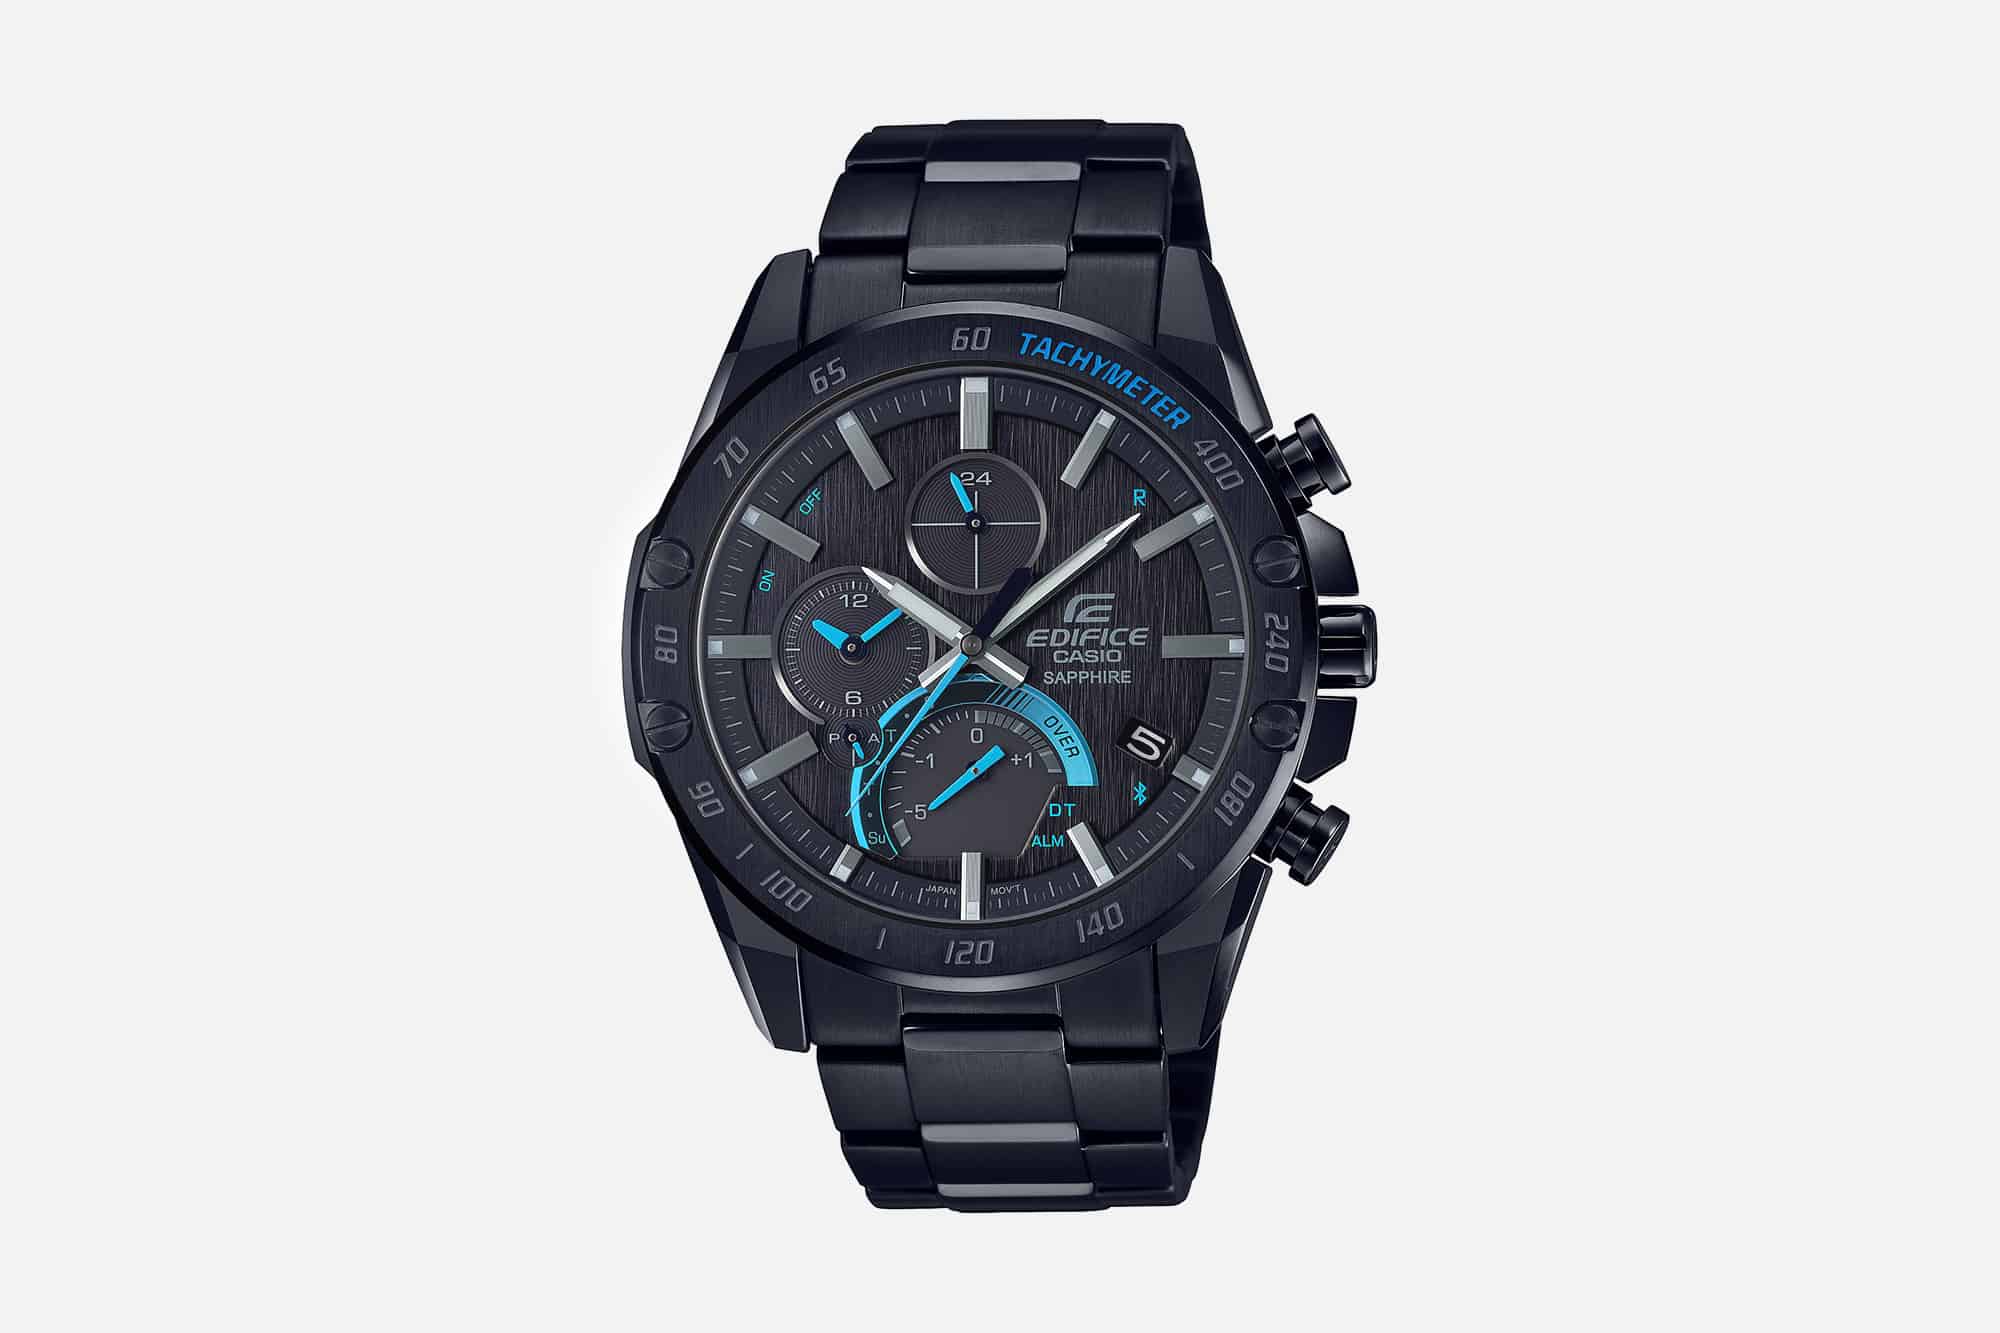 The Casio Edifice EQB-600, a Bluetooth-Connected Watch for the Frequent  Flyer - Worn & Wound